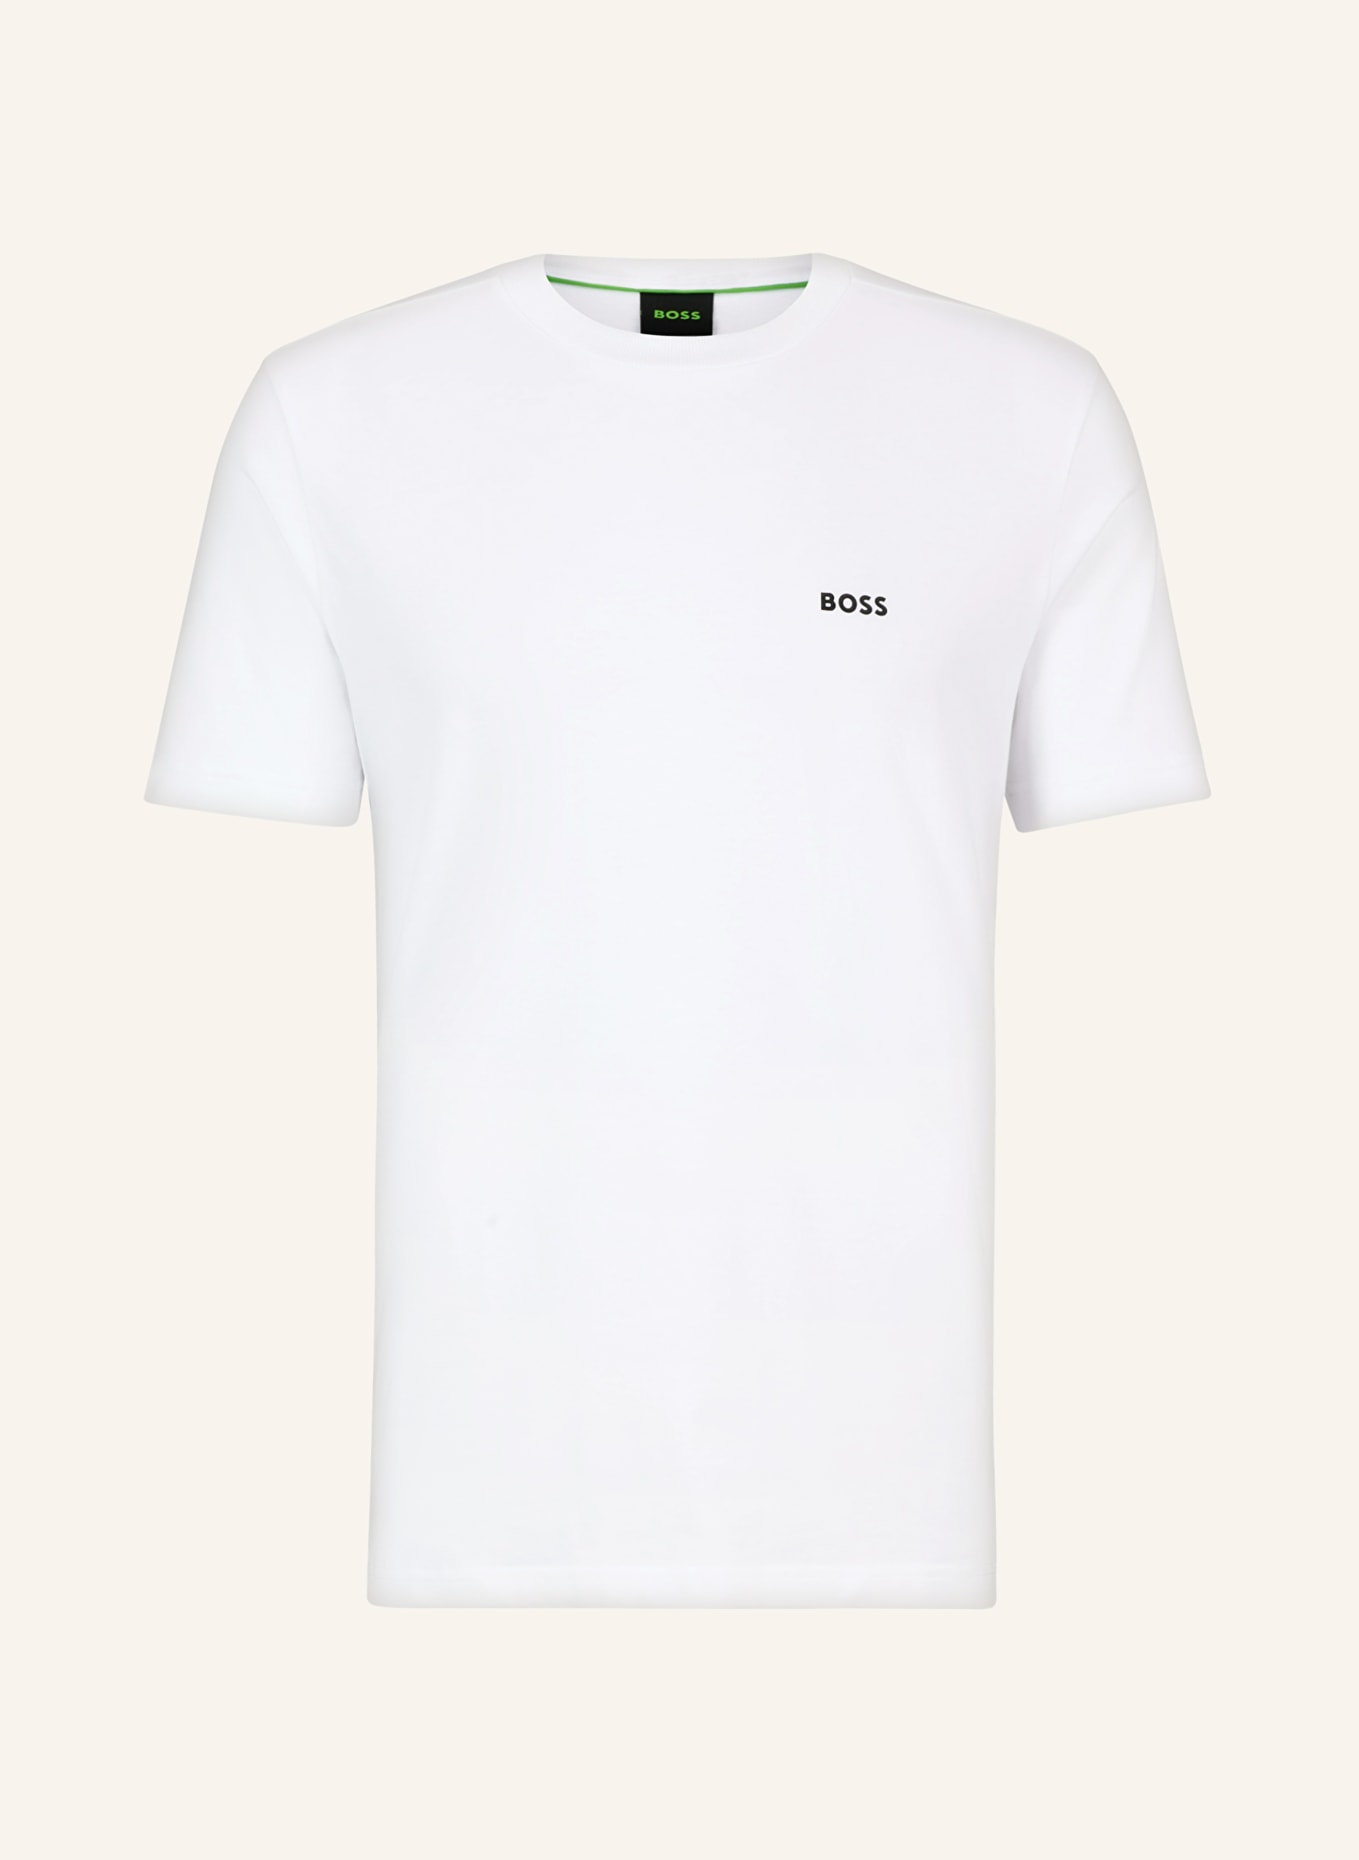 BOSS T-shirt TEE, Color: WHITE (Image 1)